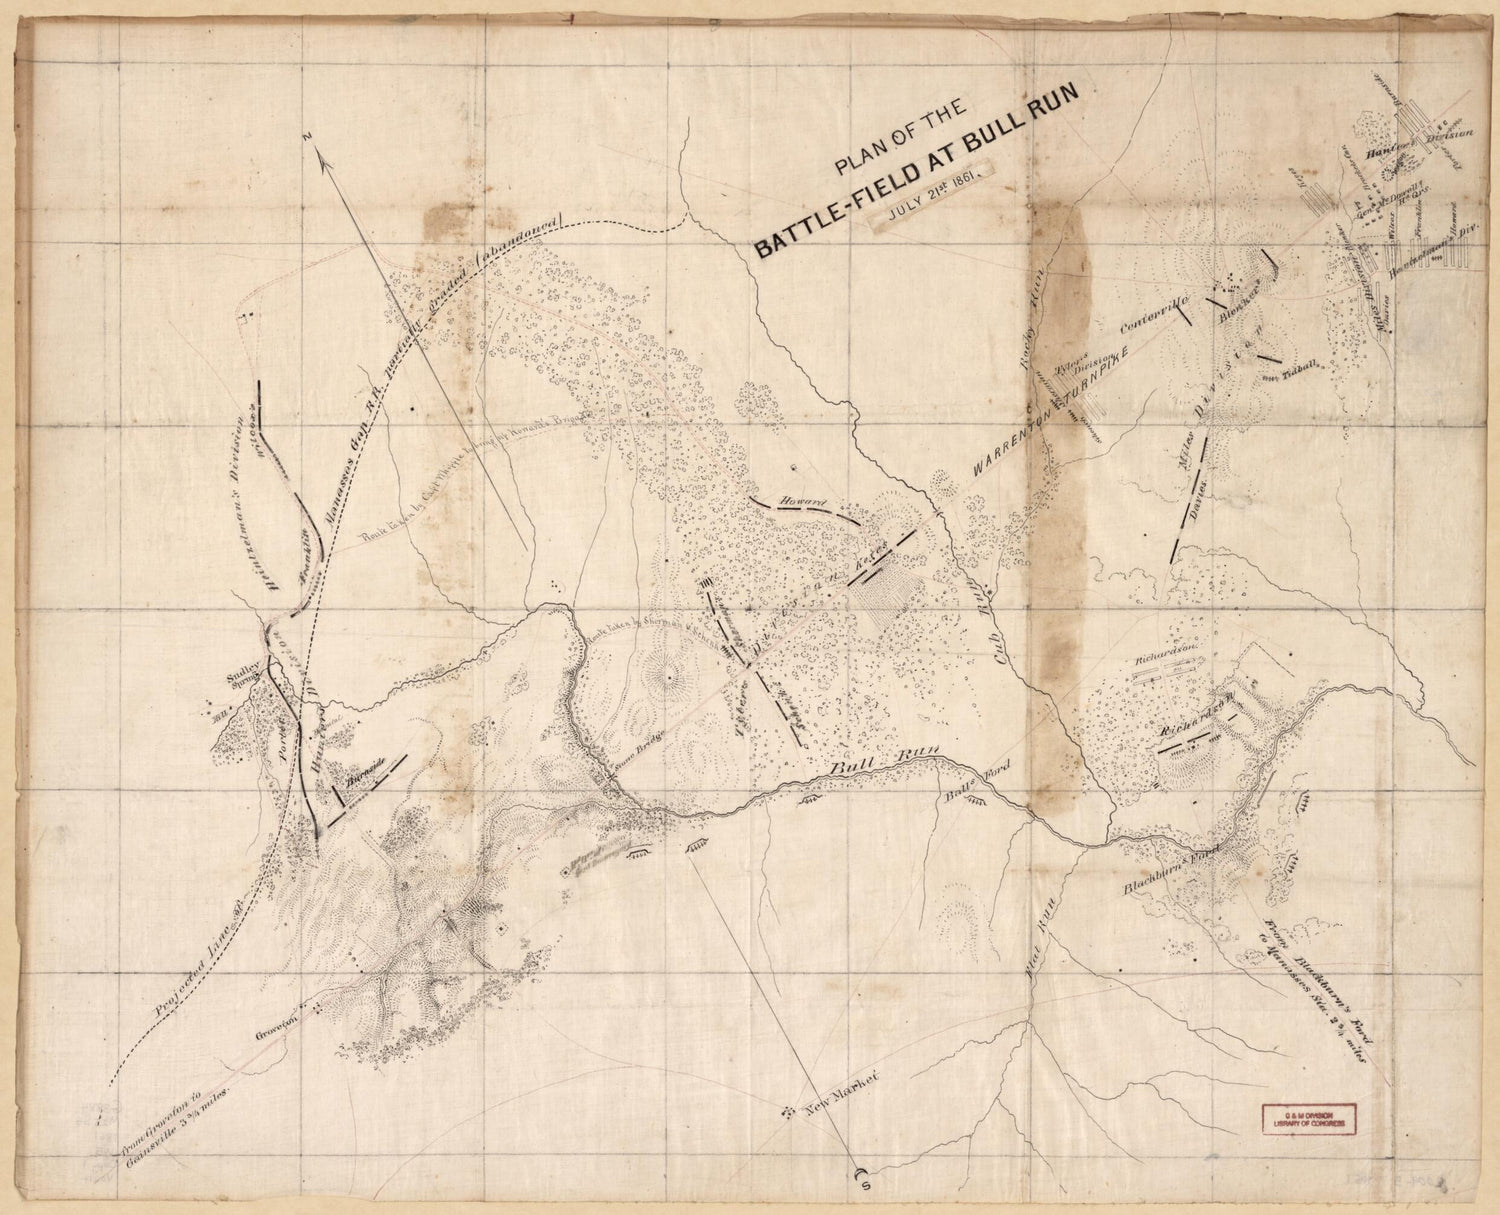 This old map of Field at Bull Run, July 21st from 1861. (Plan of the Battlefield at Bull Run, July 21st from 1861) was created by Amiel Weeks Whipple in 1861